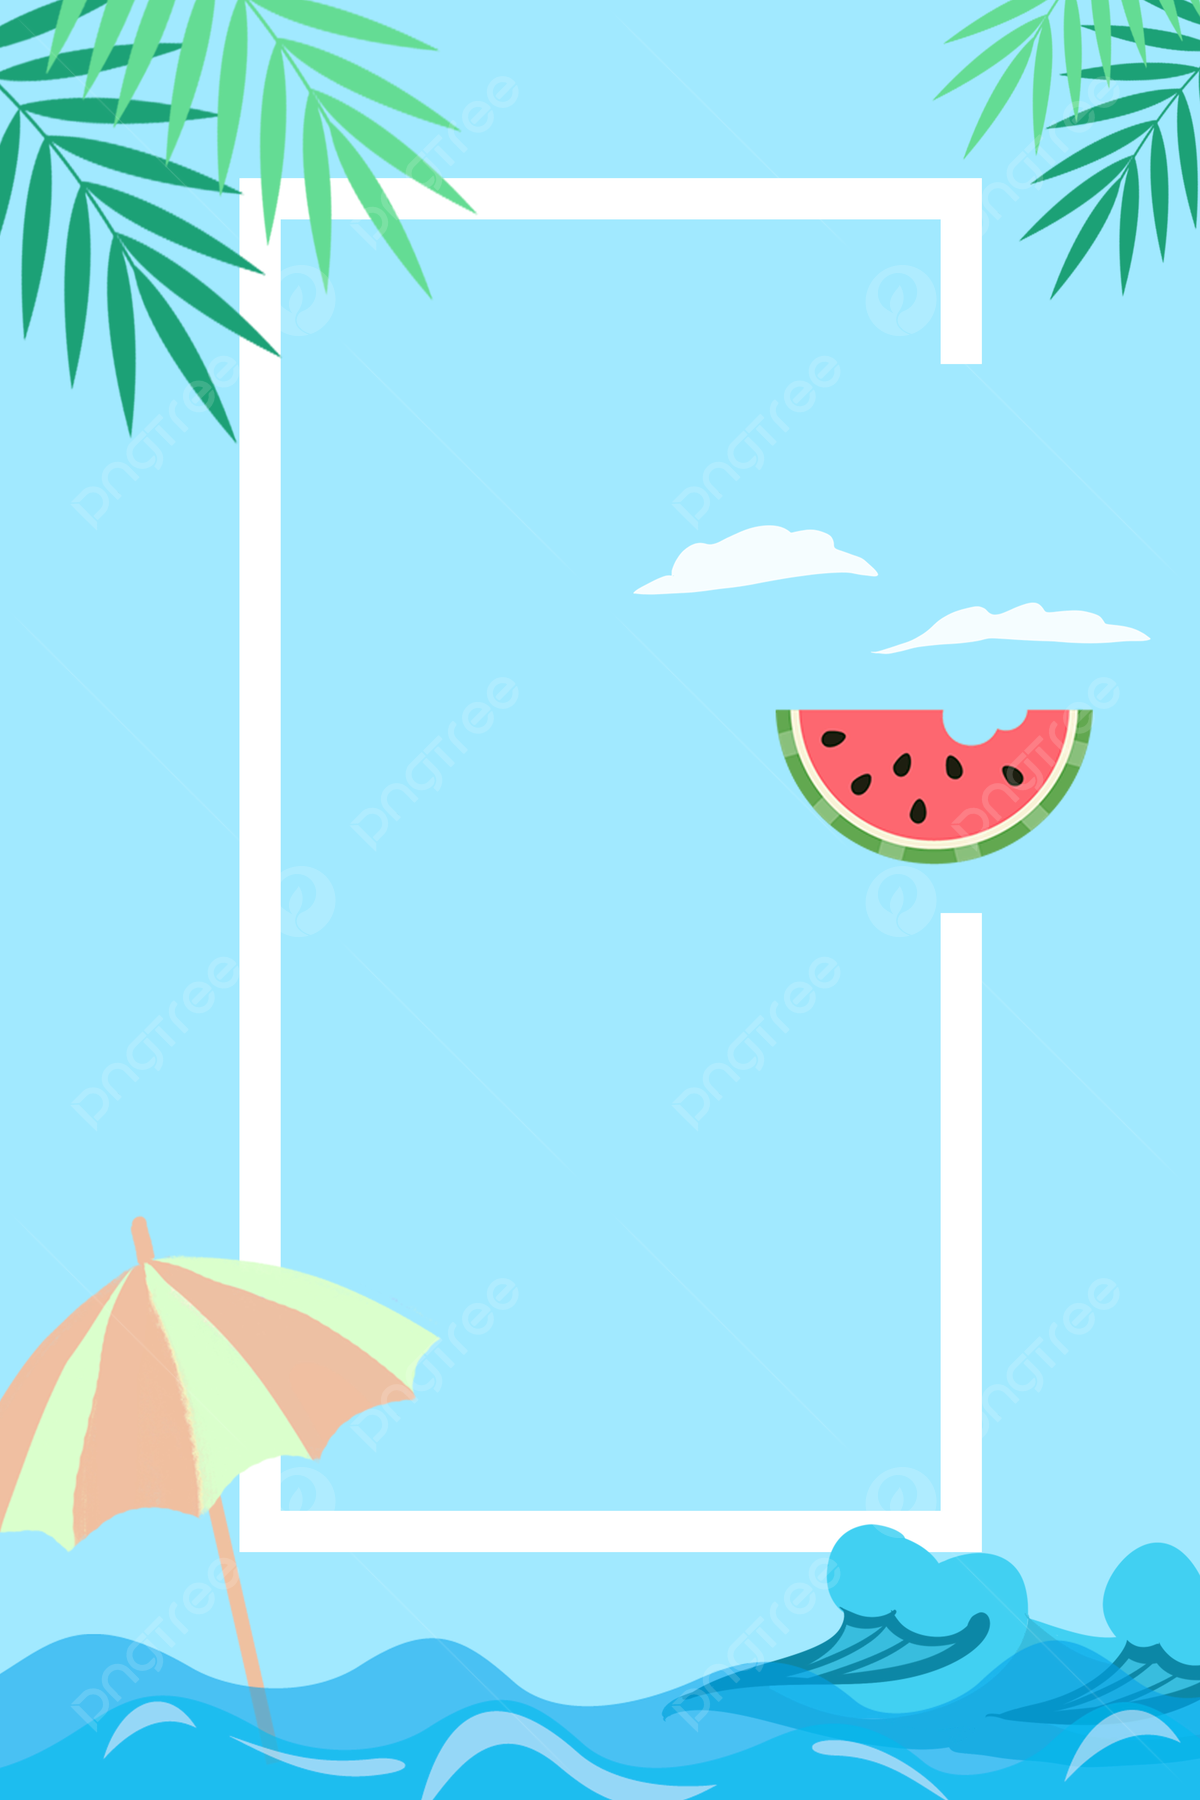 pngtree summer geometric poster discount picture image 944972